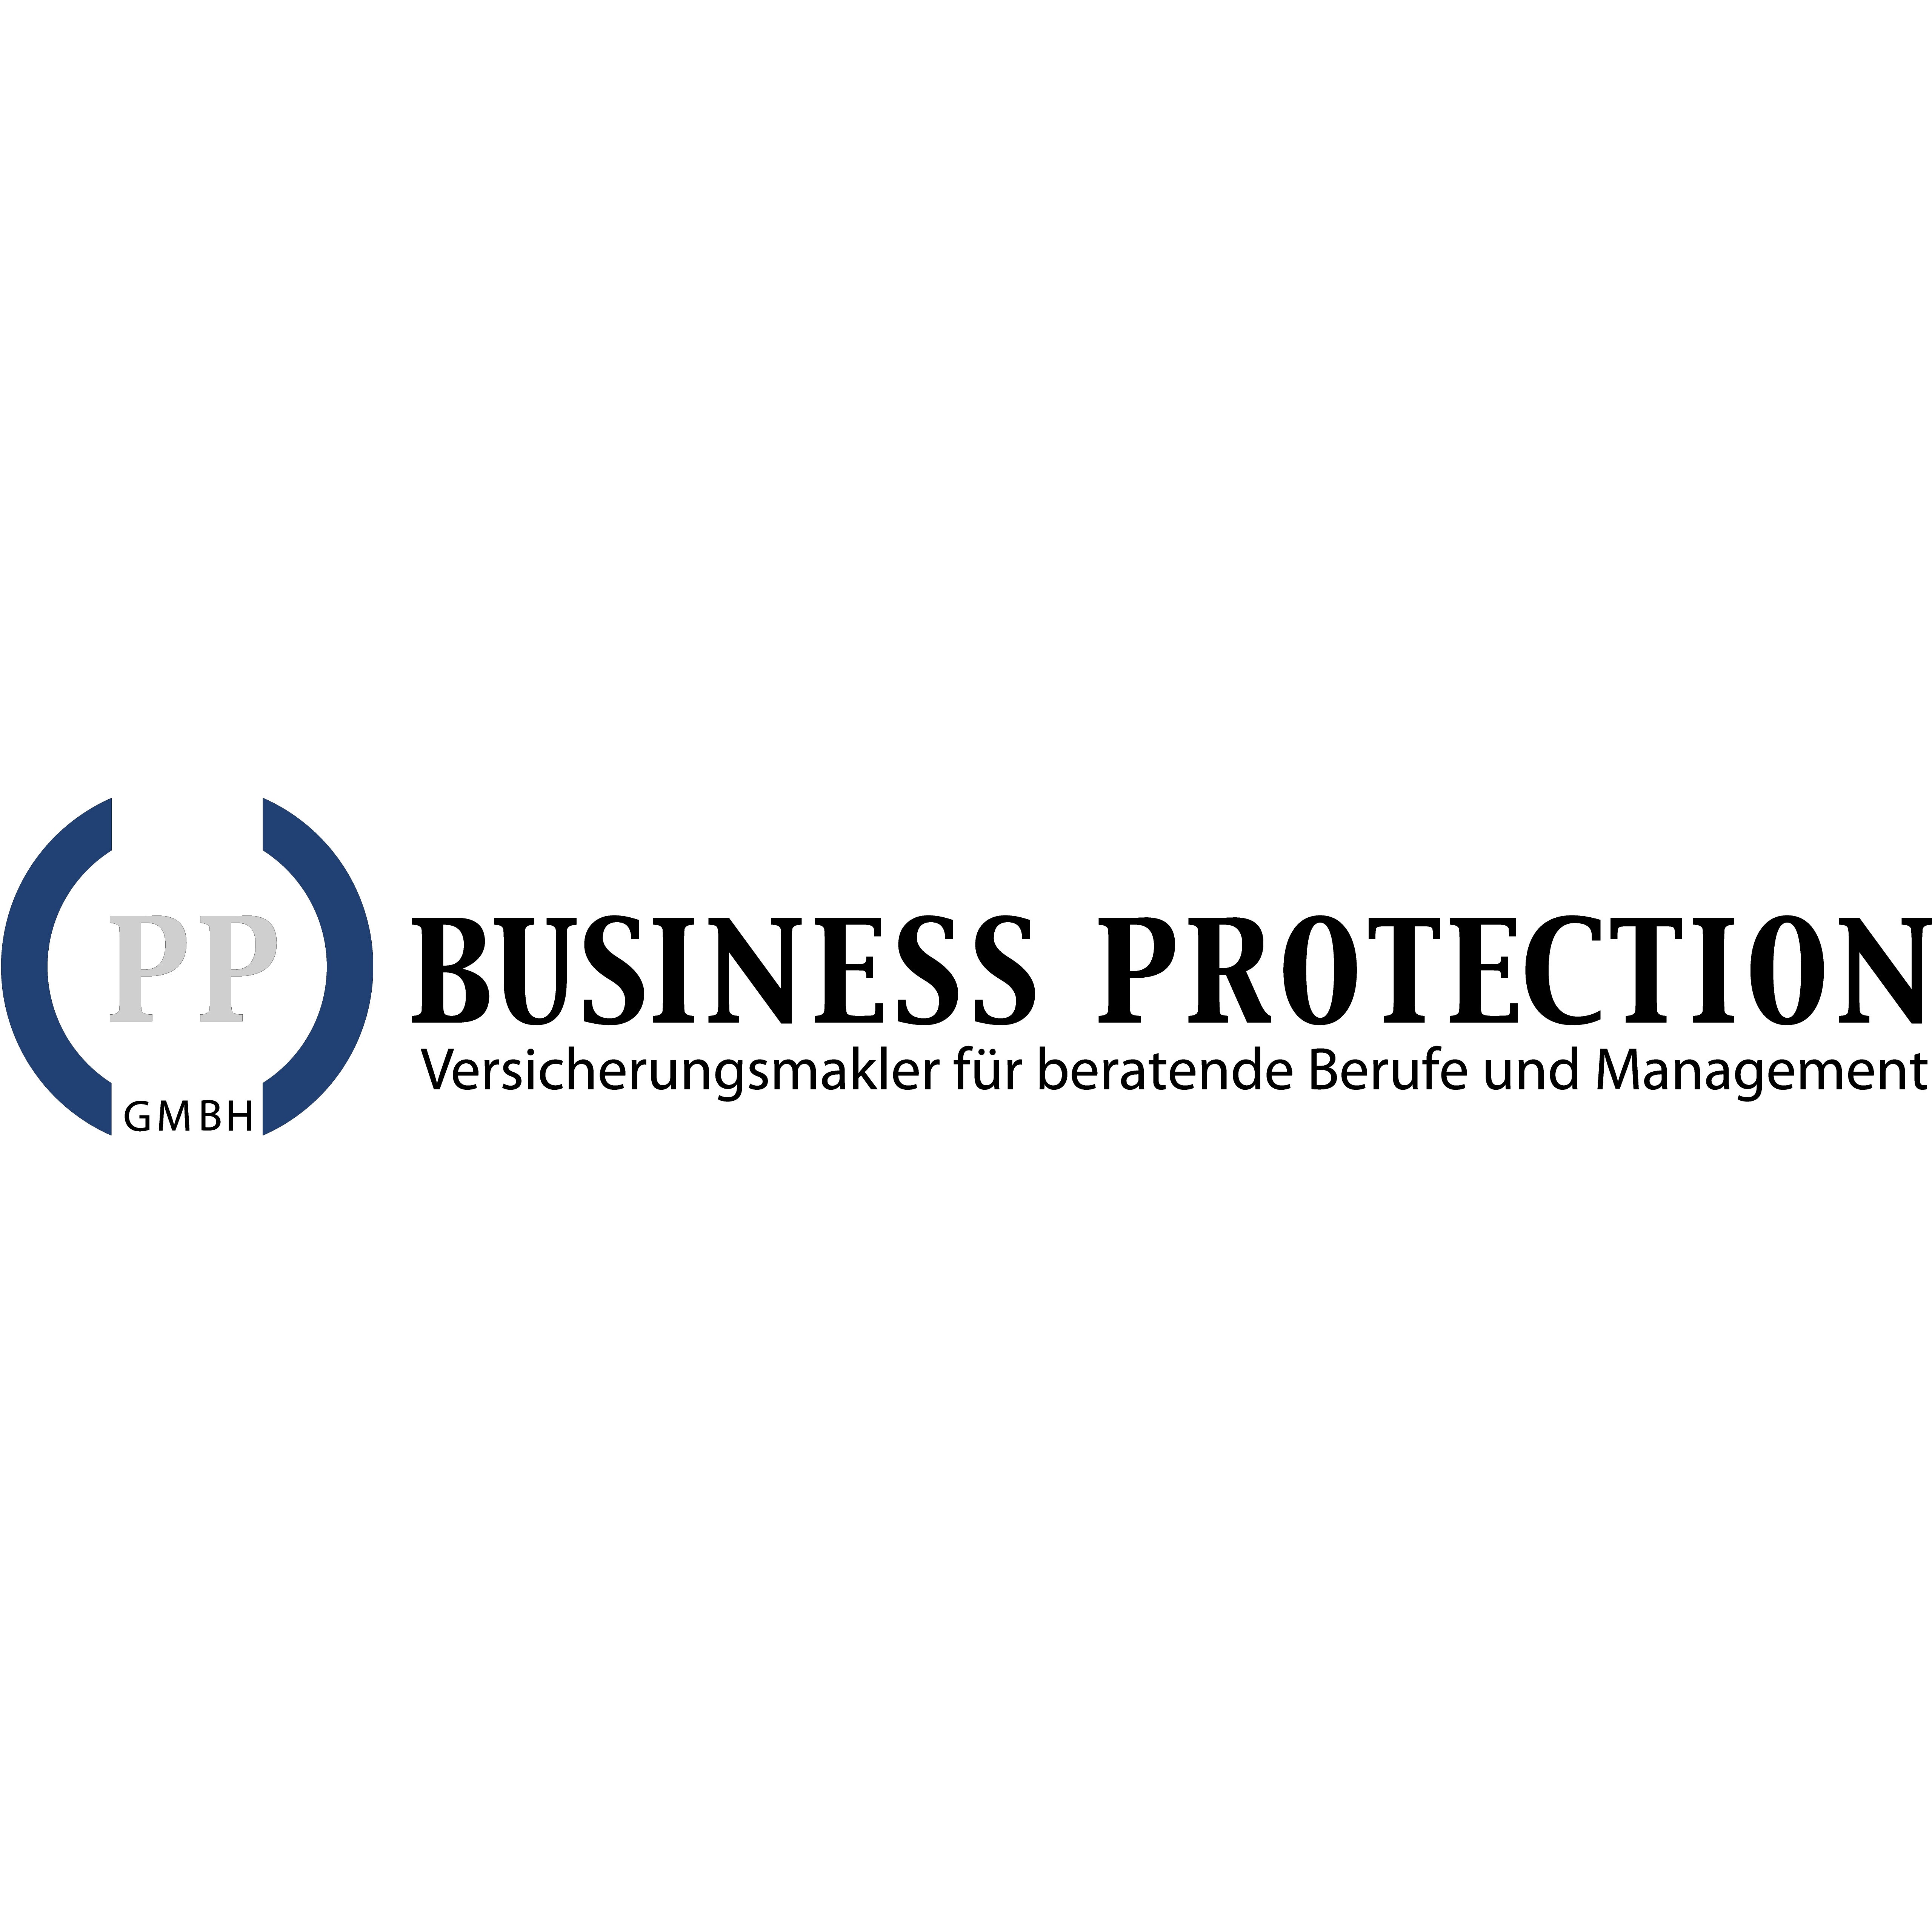 PP Business Protection GmbH